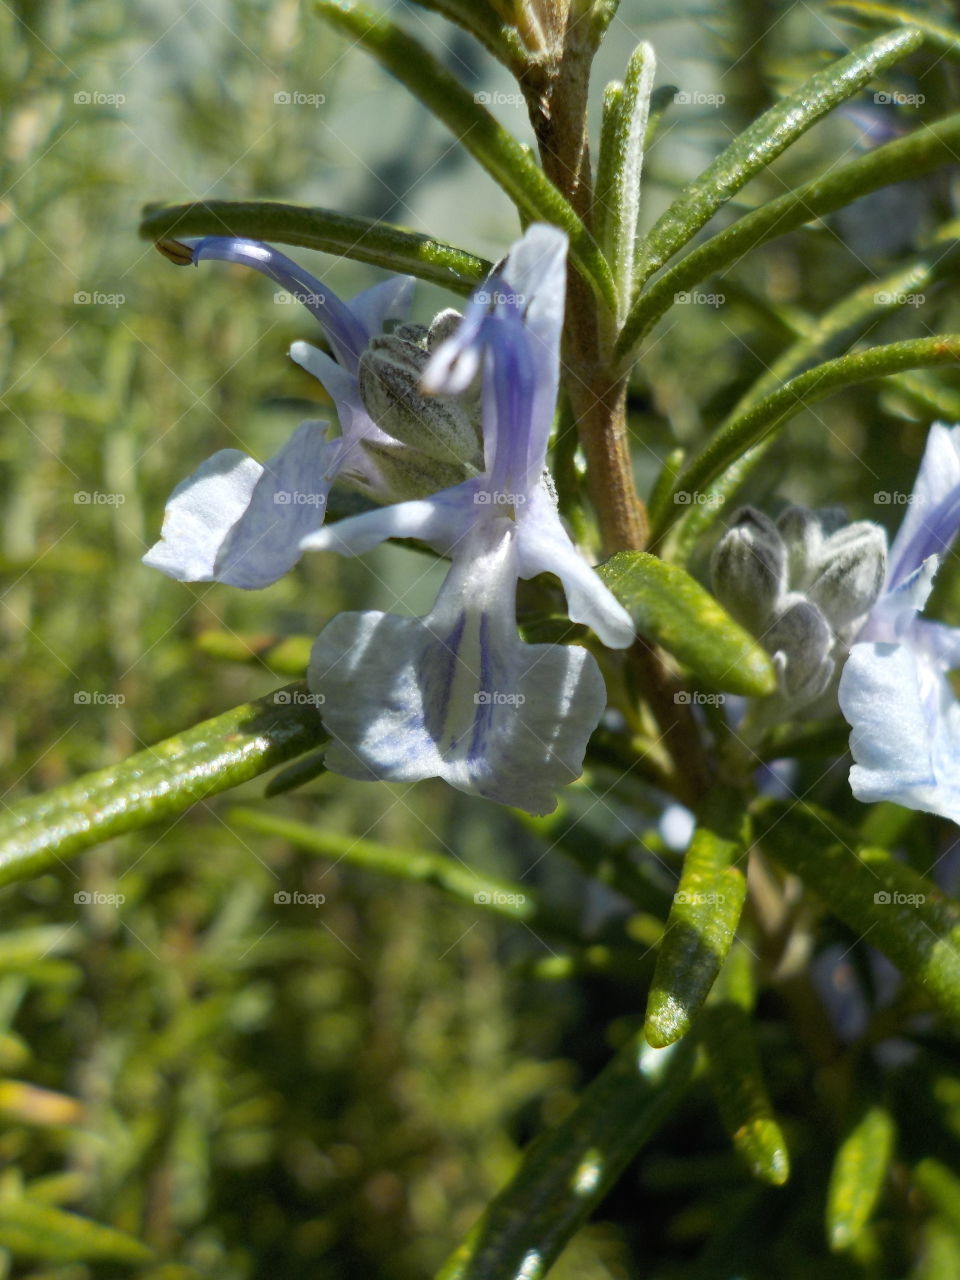 Rosemary's flowers resemble orchids!? 